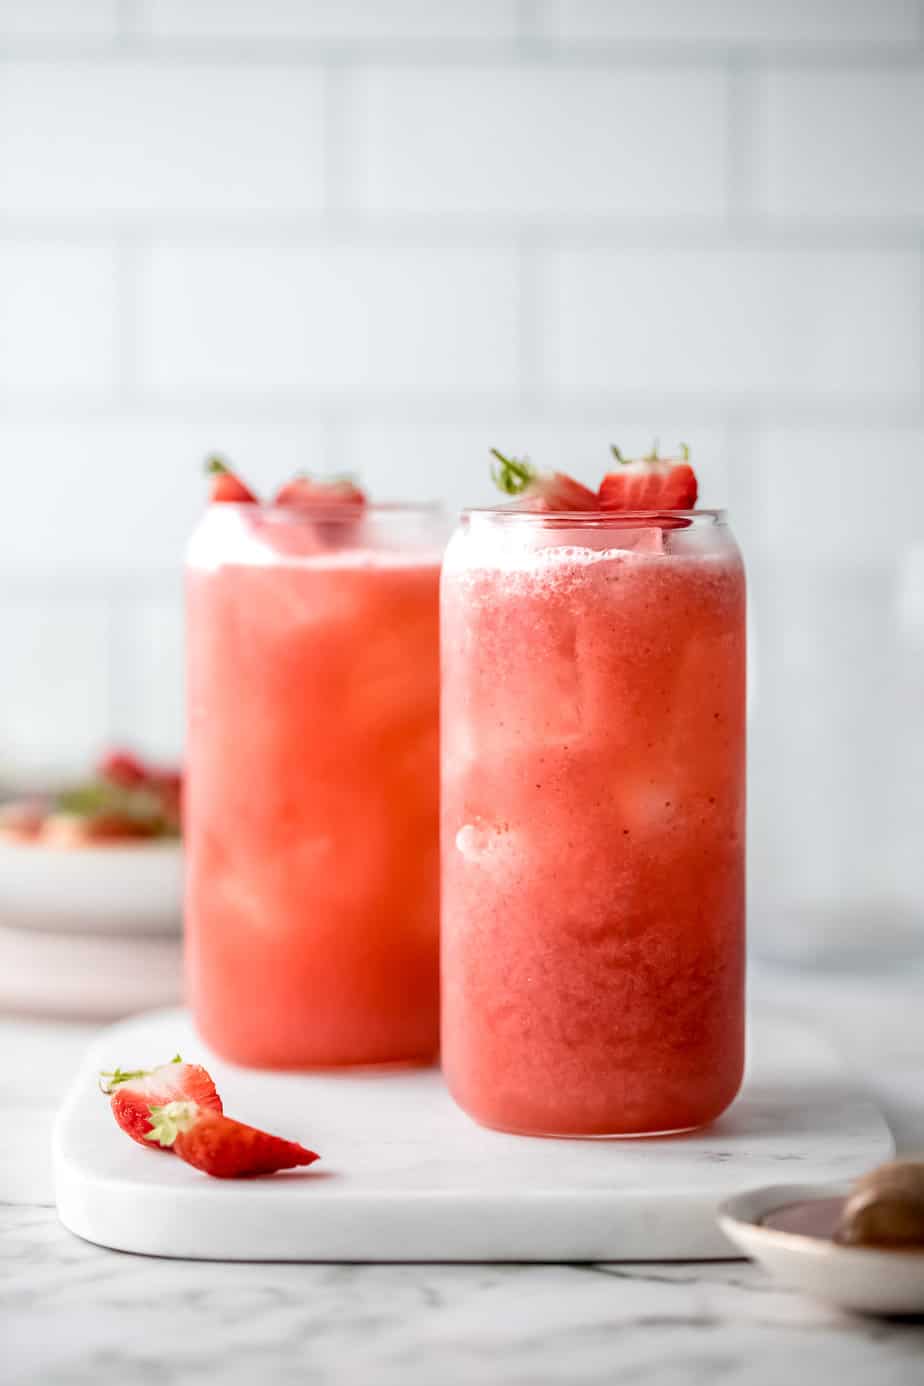 Strawberry drinks on marble with fresh strawberries cut in half.